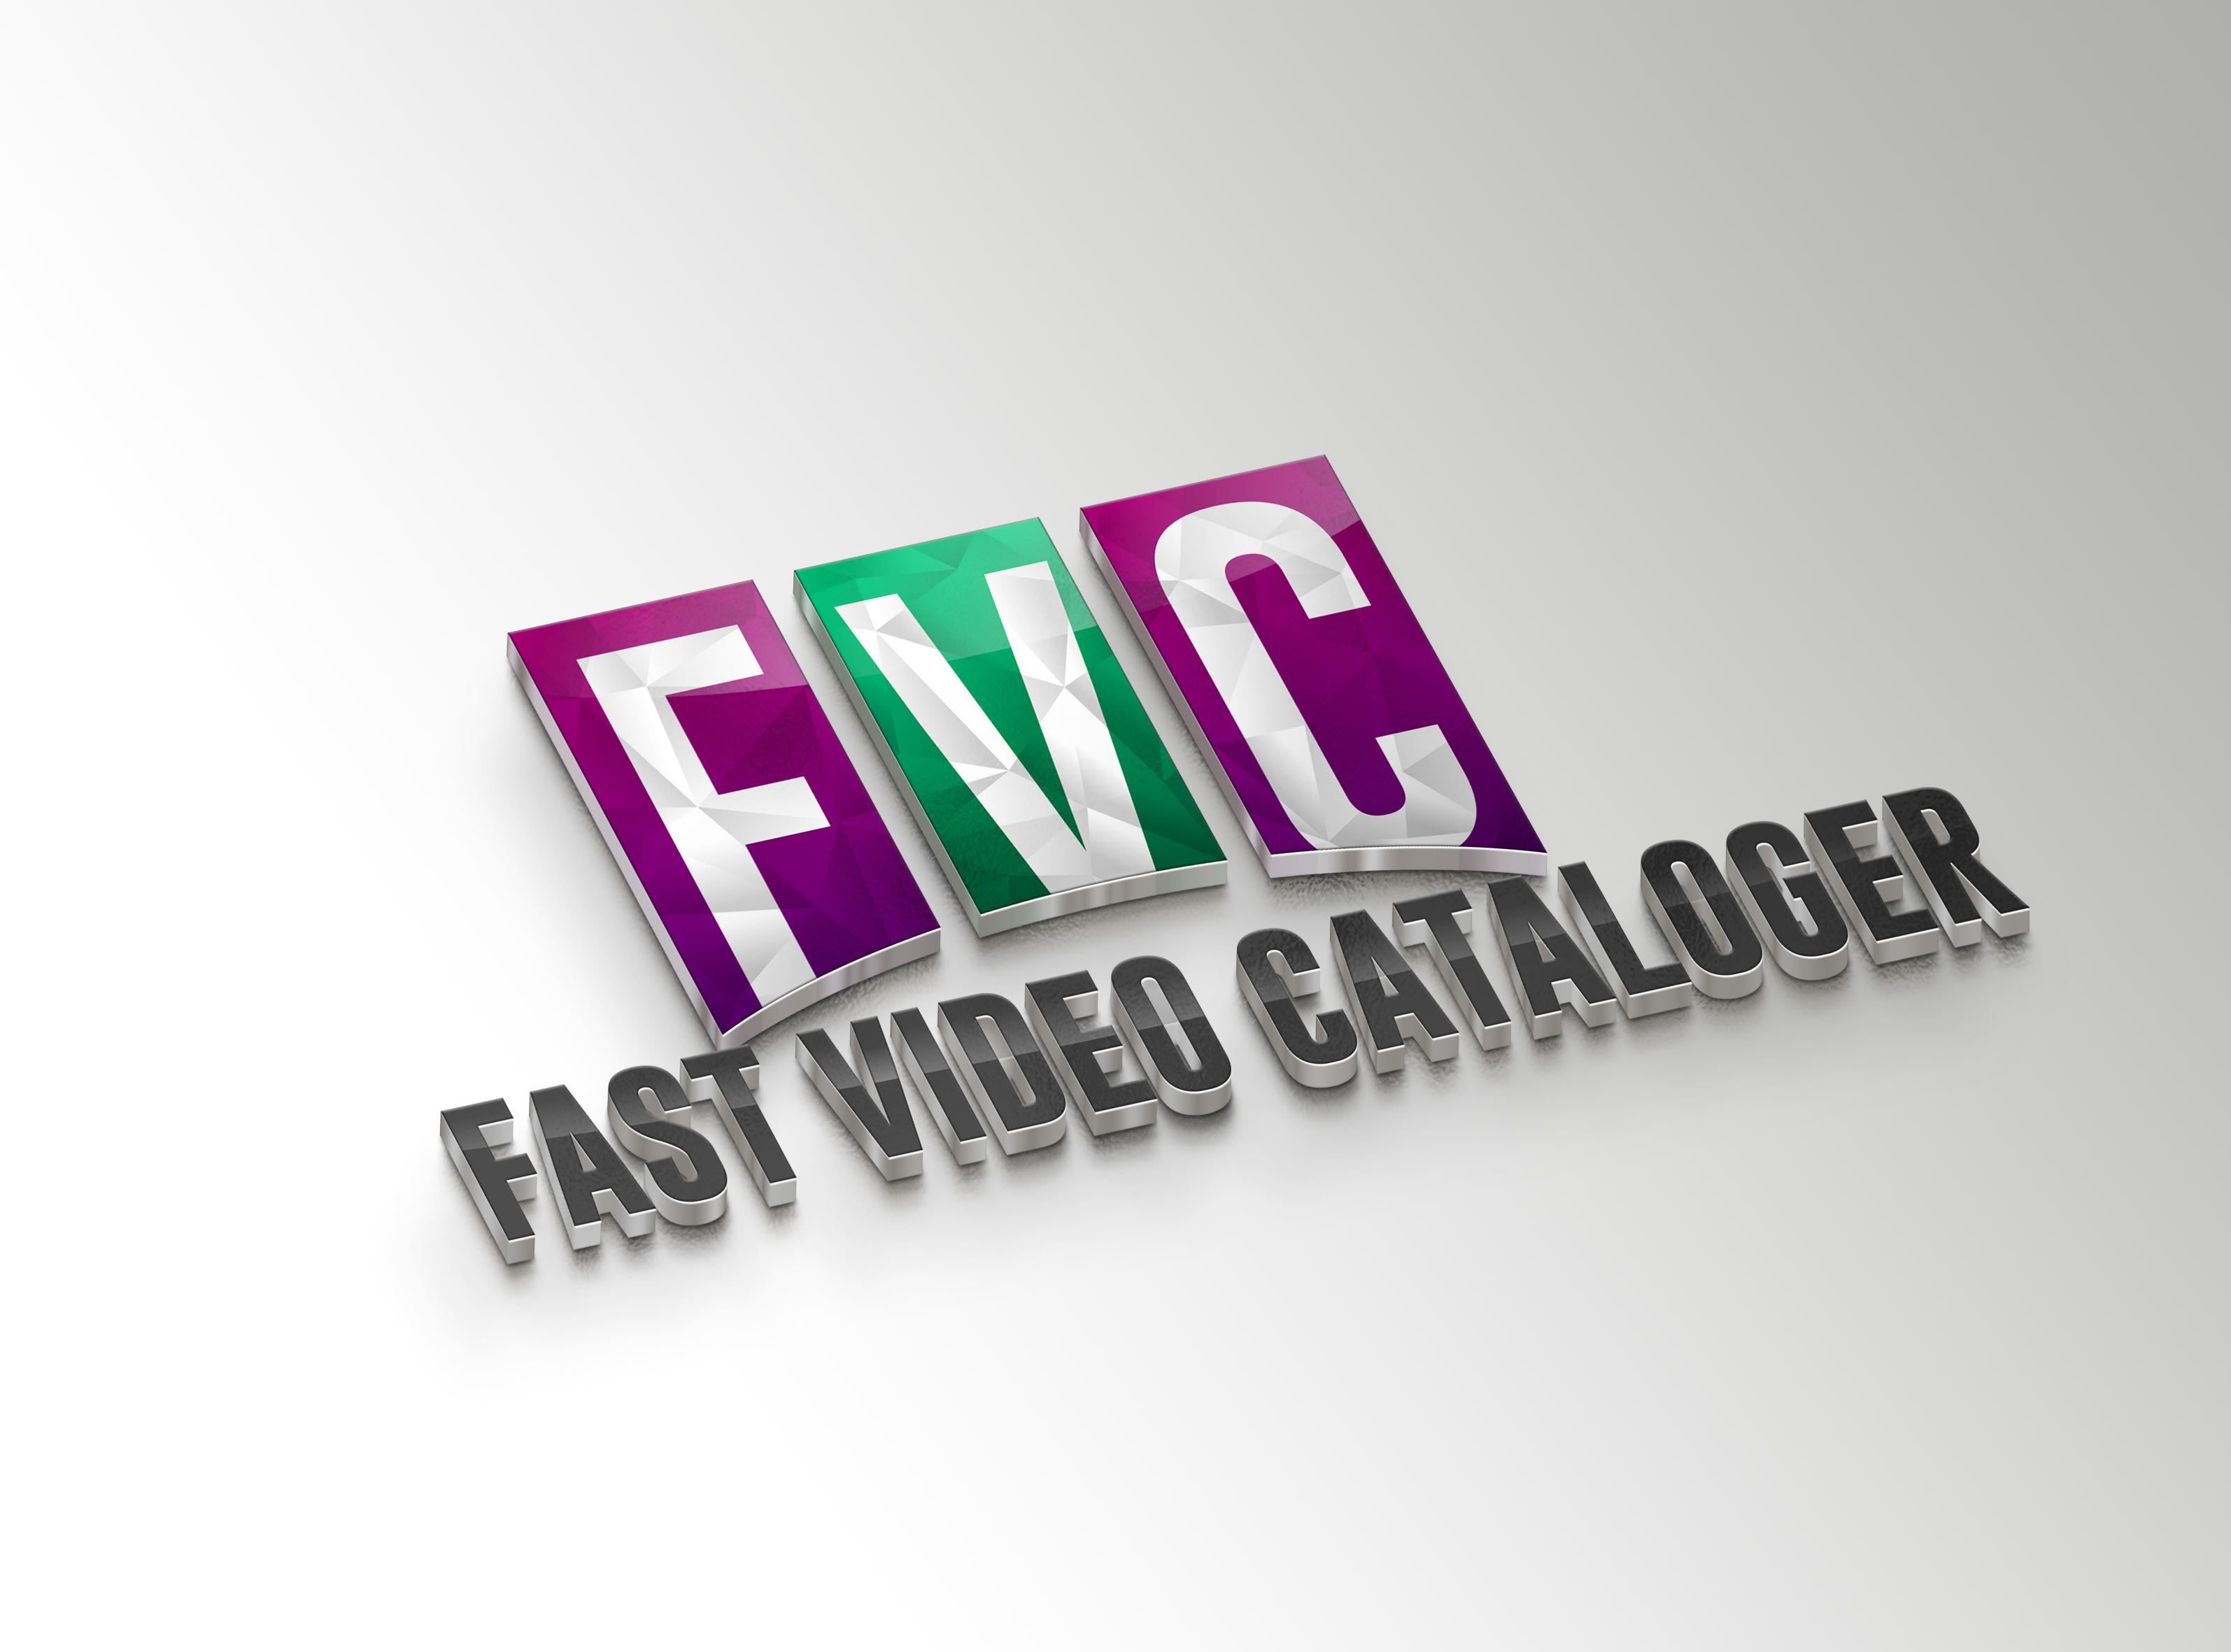 Fast Video Cataloger 8.6.3.0 for mac instal free